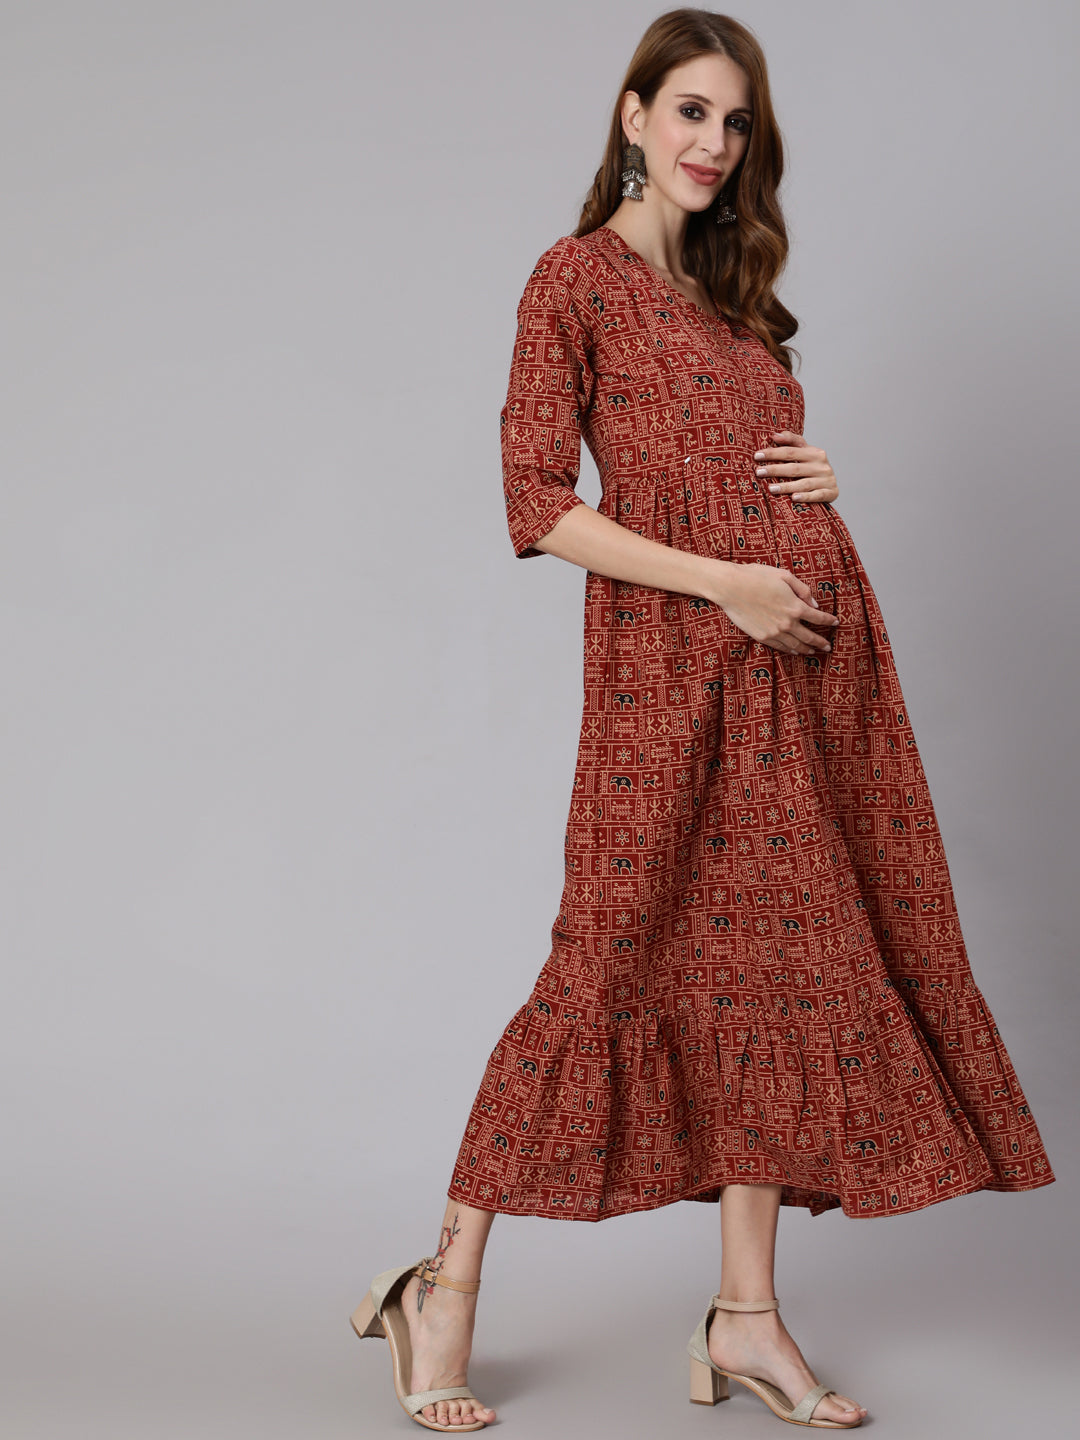 Women's Rust Ethnic Printed Maternity Dress With Three Quarter Sleeves - Nayo Clothing